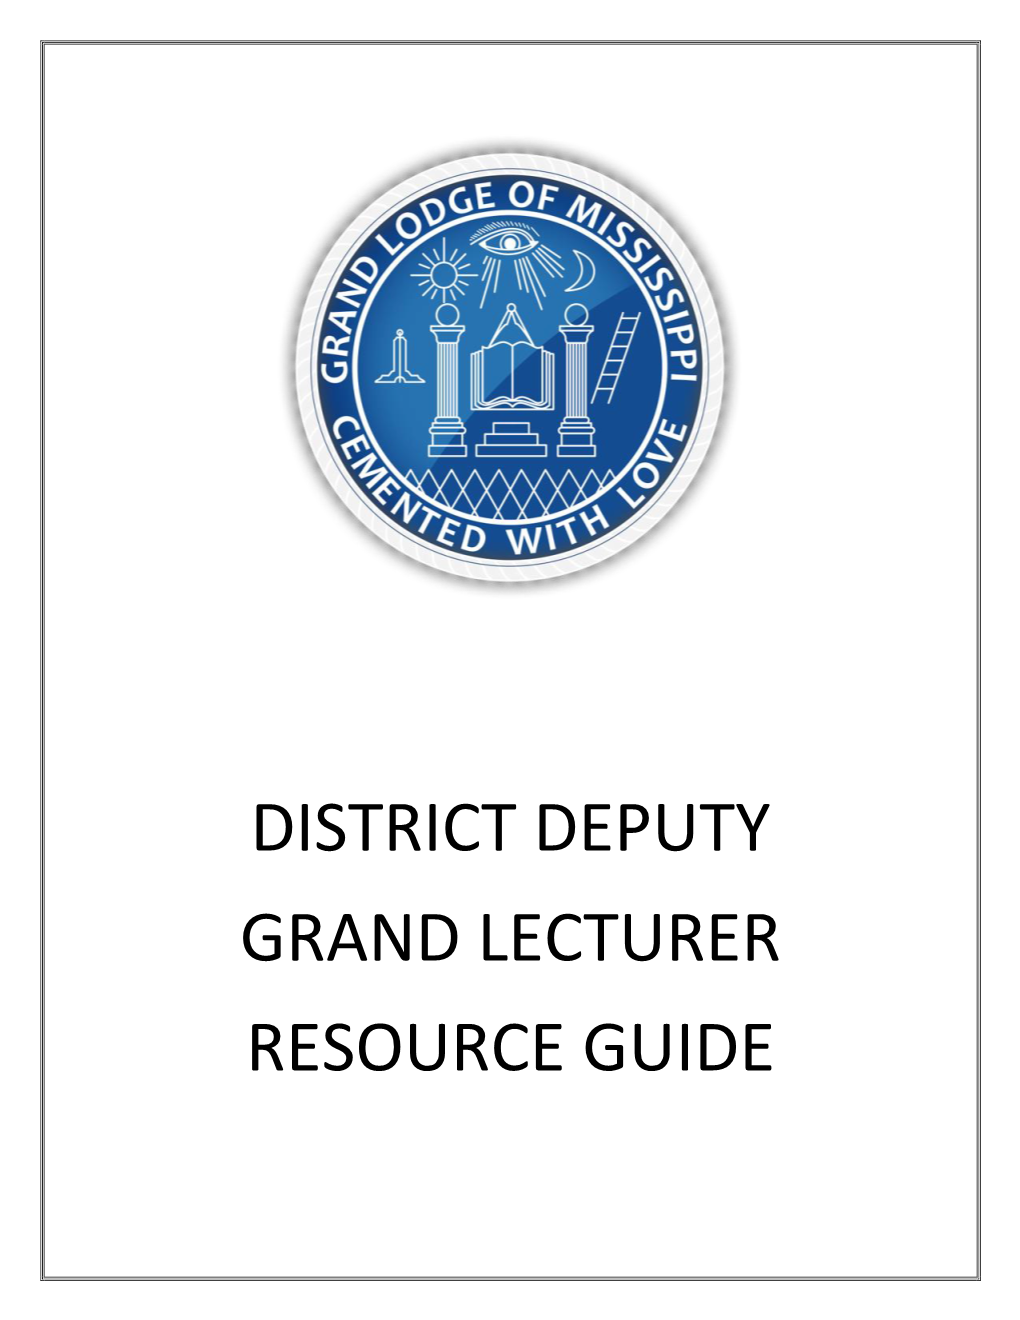 District Deputy Grand Lecturer Resource Guide